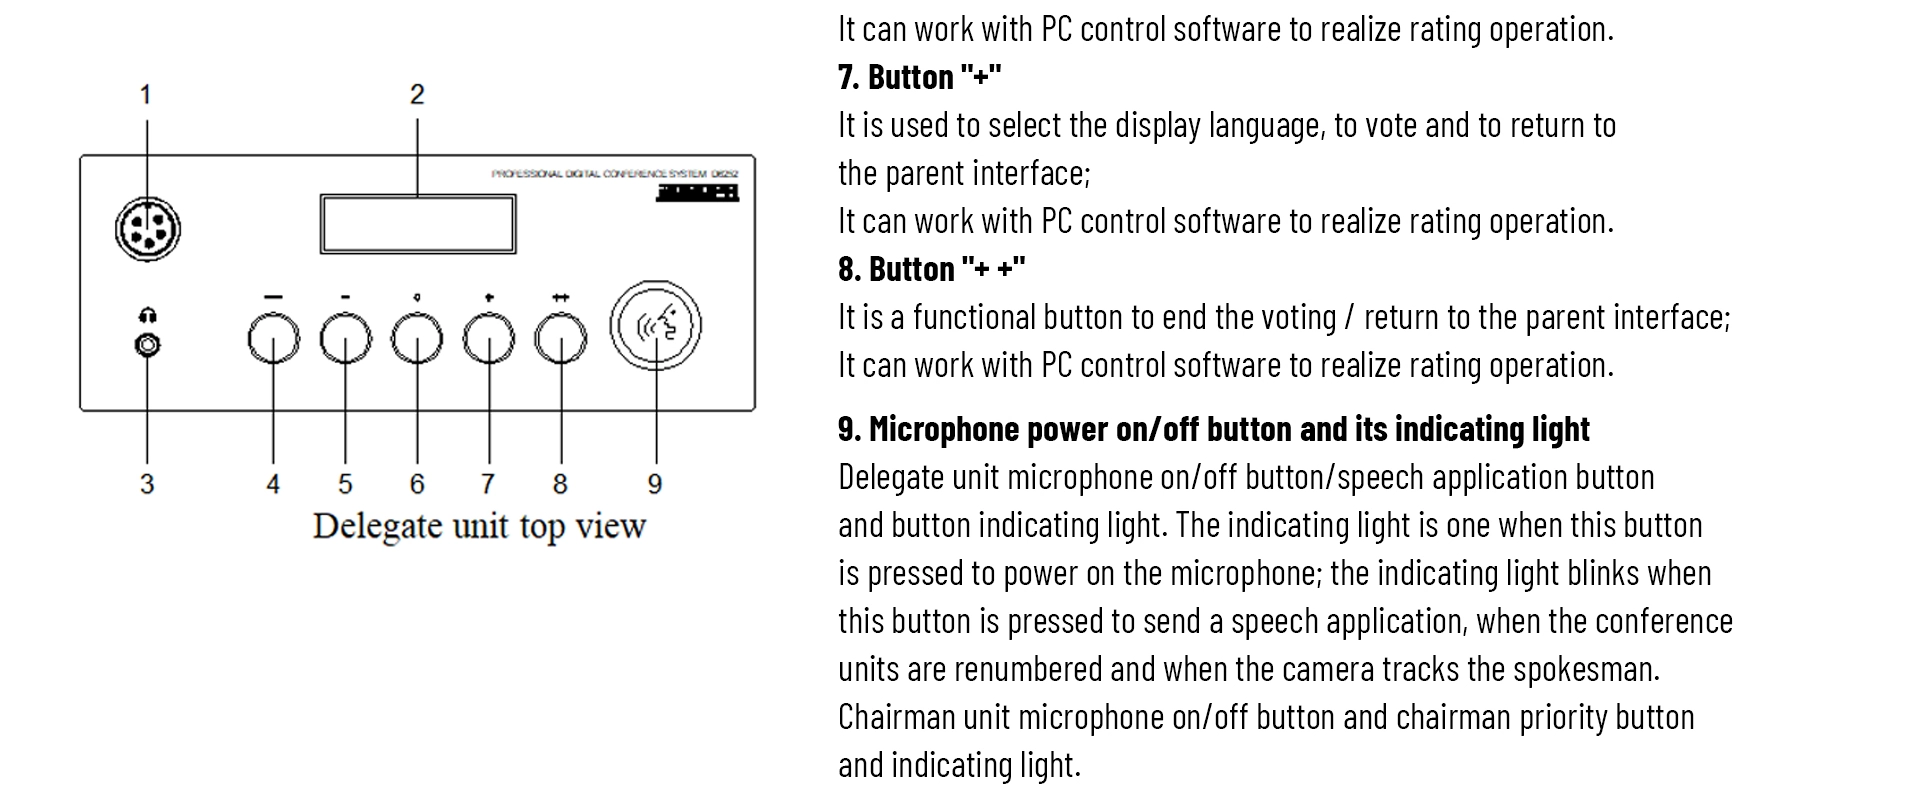 Embedded Delegate Microphone with Voting Function